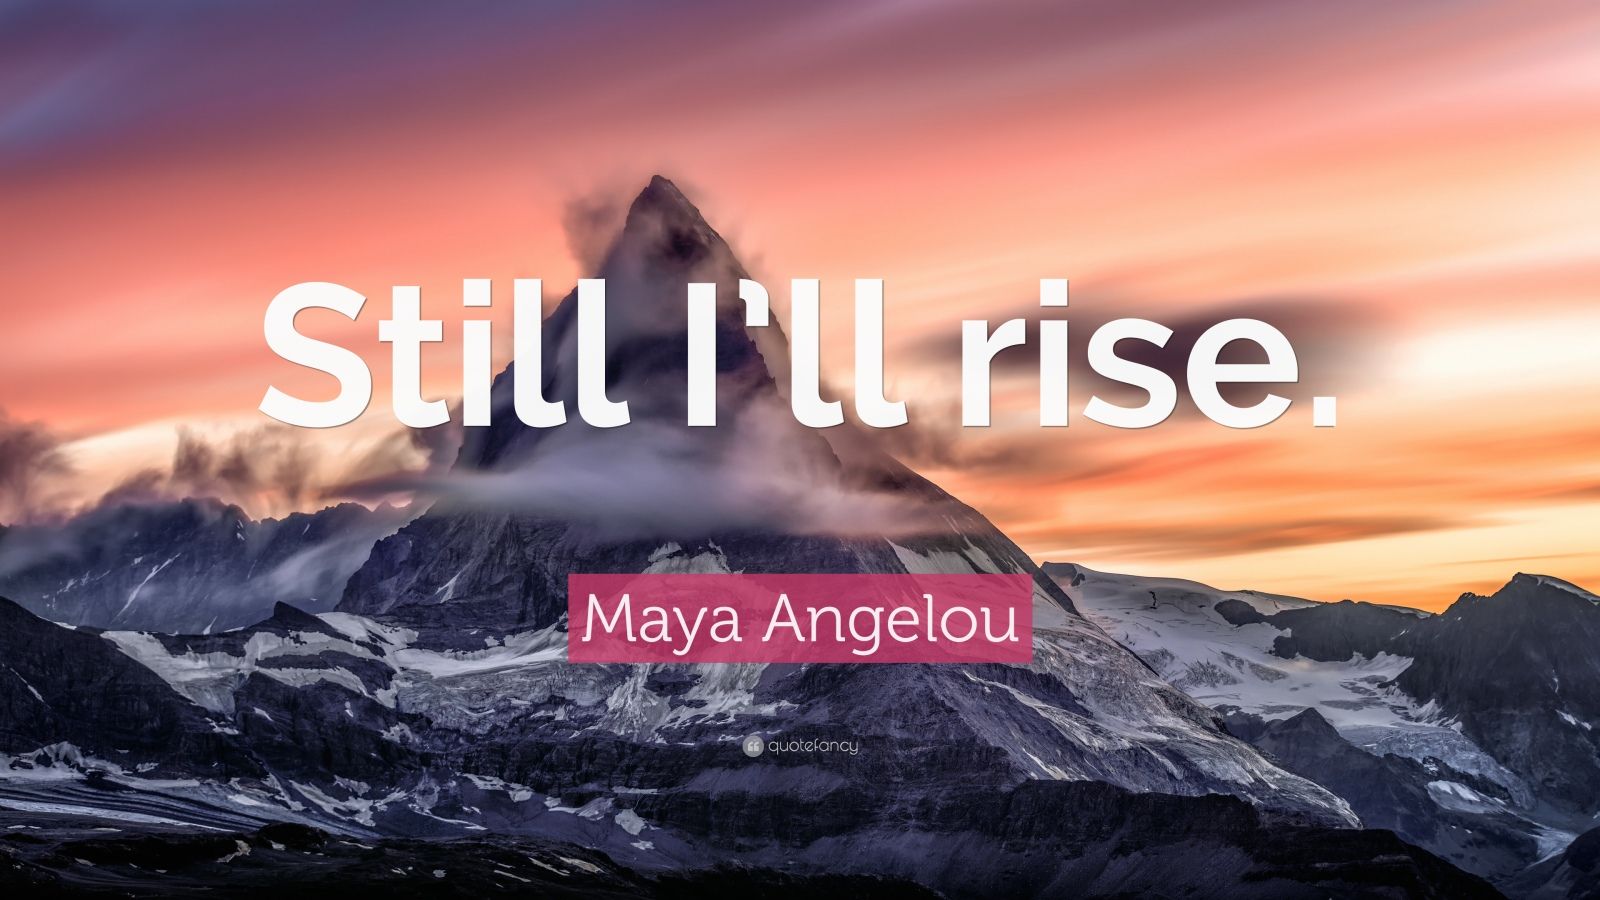 maya angelou poems still i rise meaning